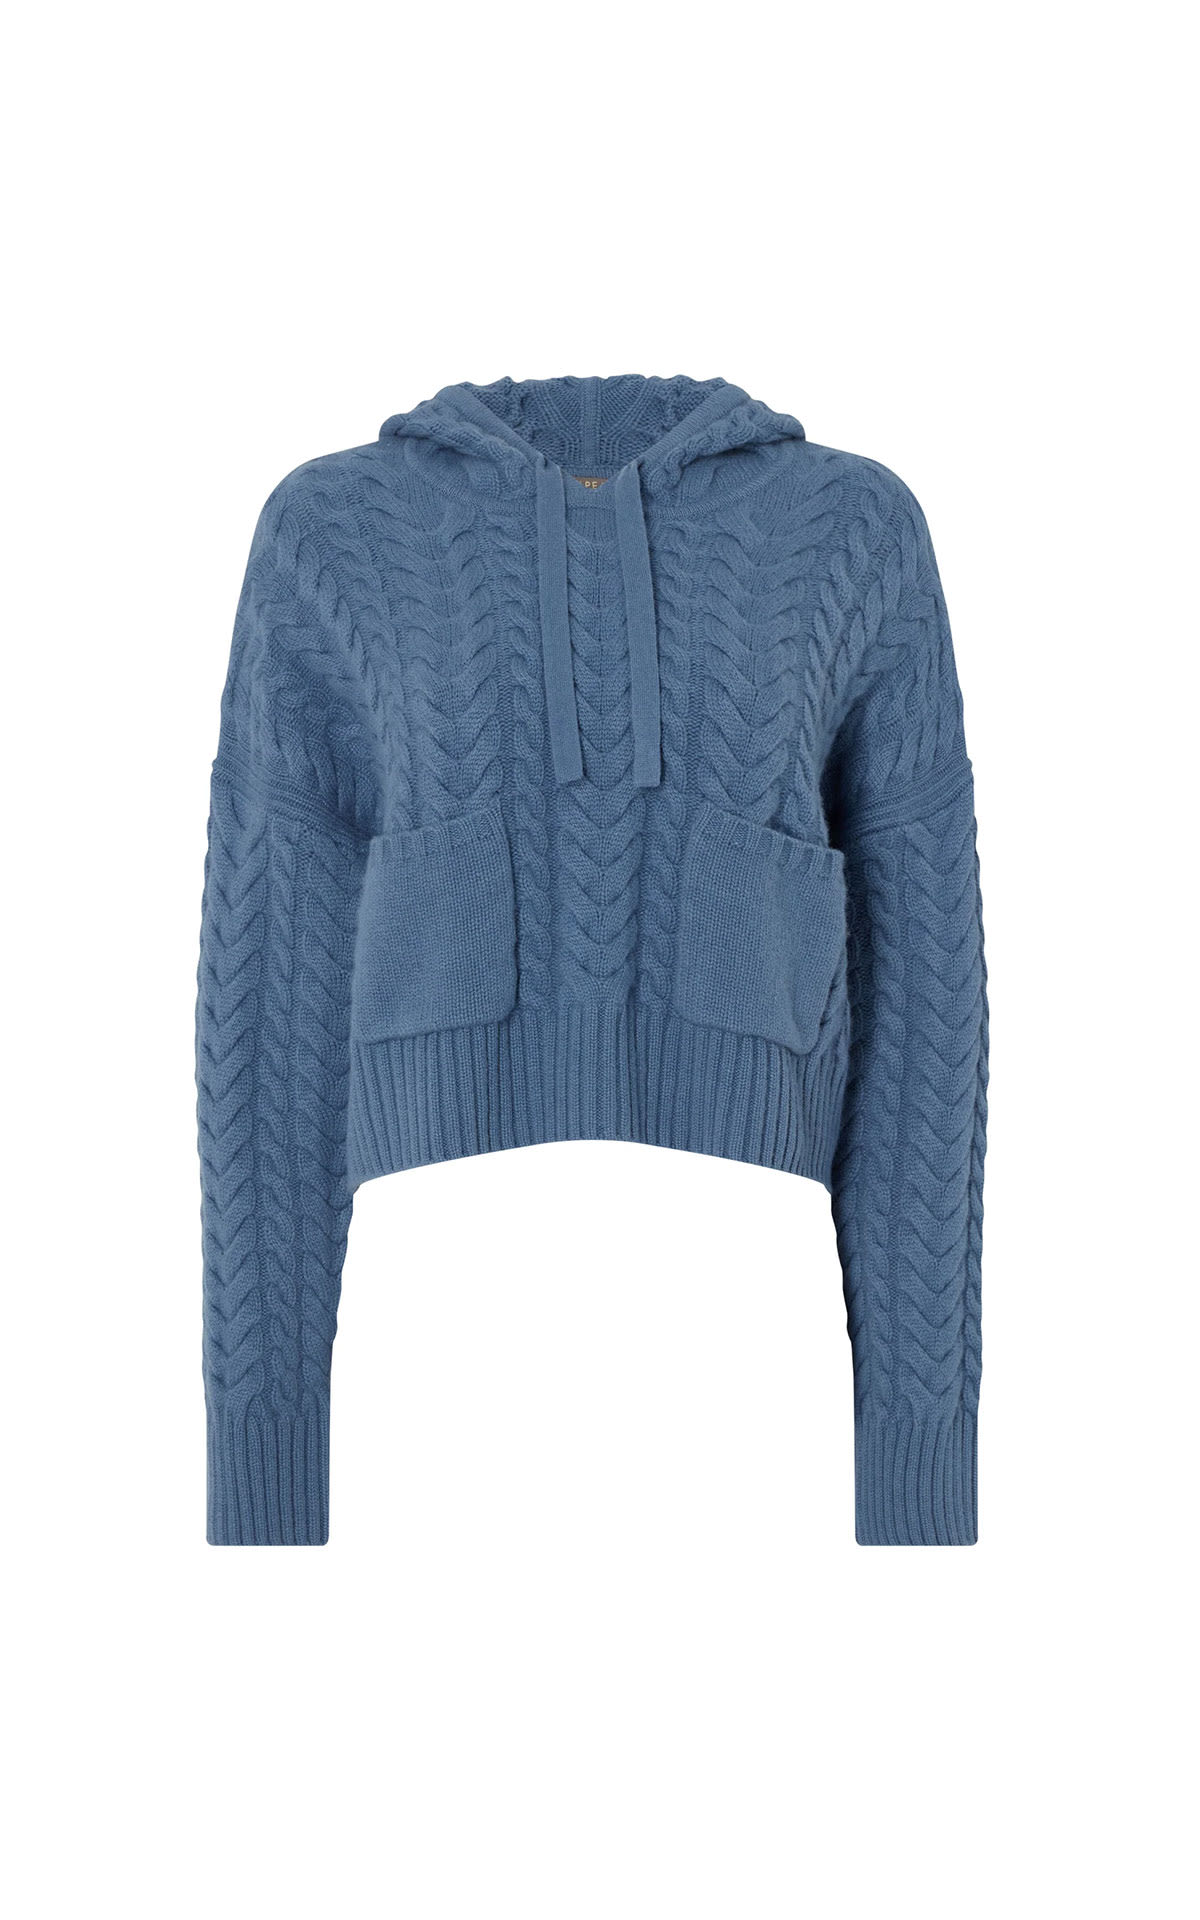 N. Peal Cable hooded jumper from Bicester Village